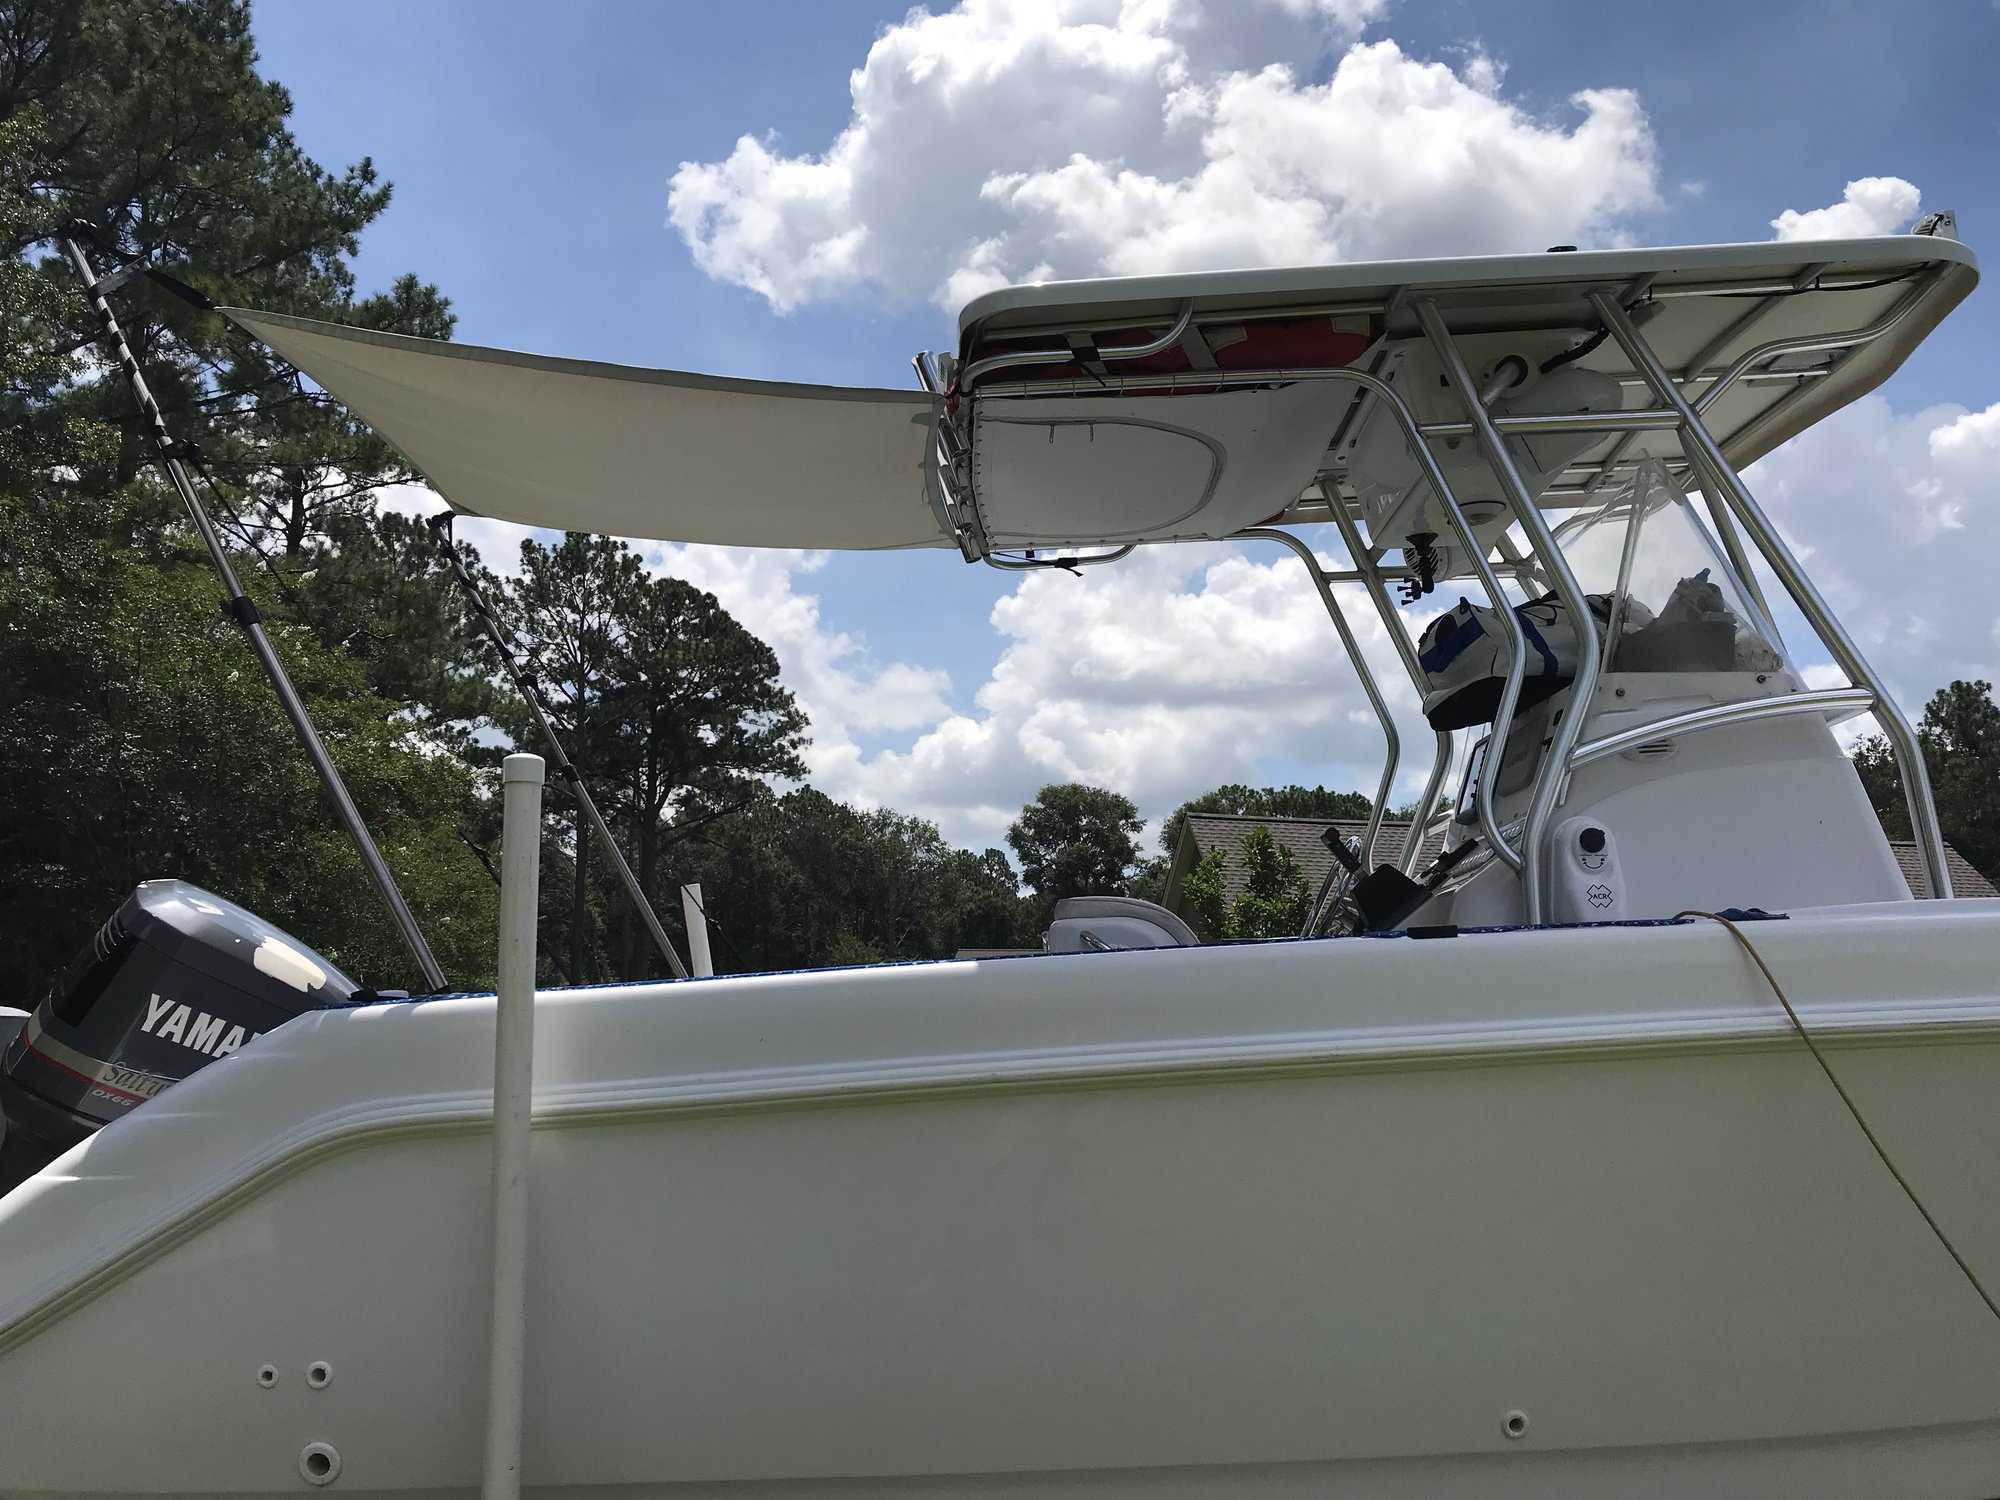 Rod Racks on the T-Top? - The Hull Truth - Boating and Fishing Forum